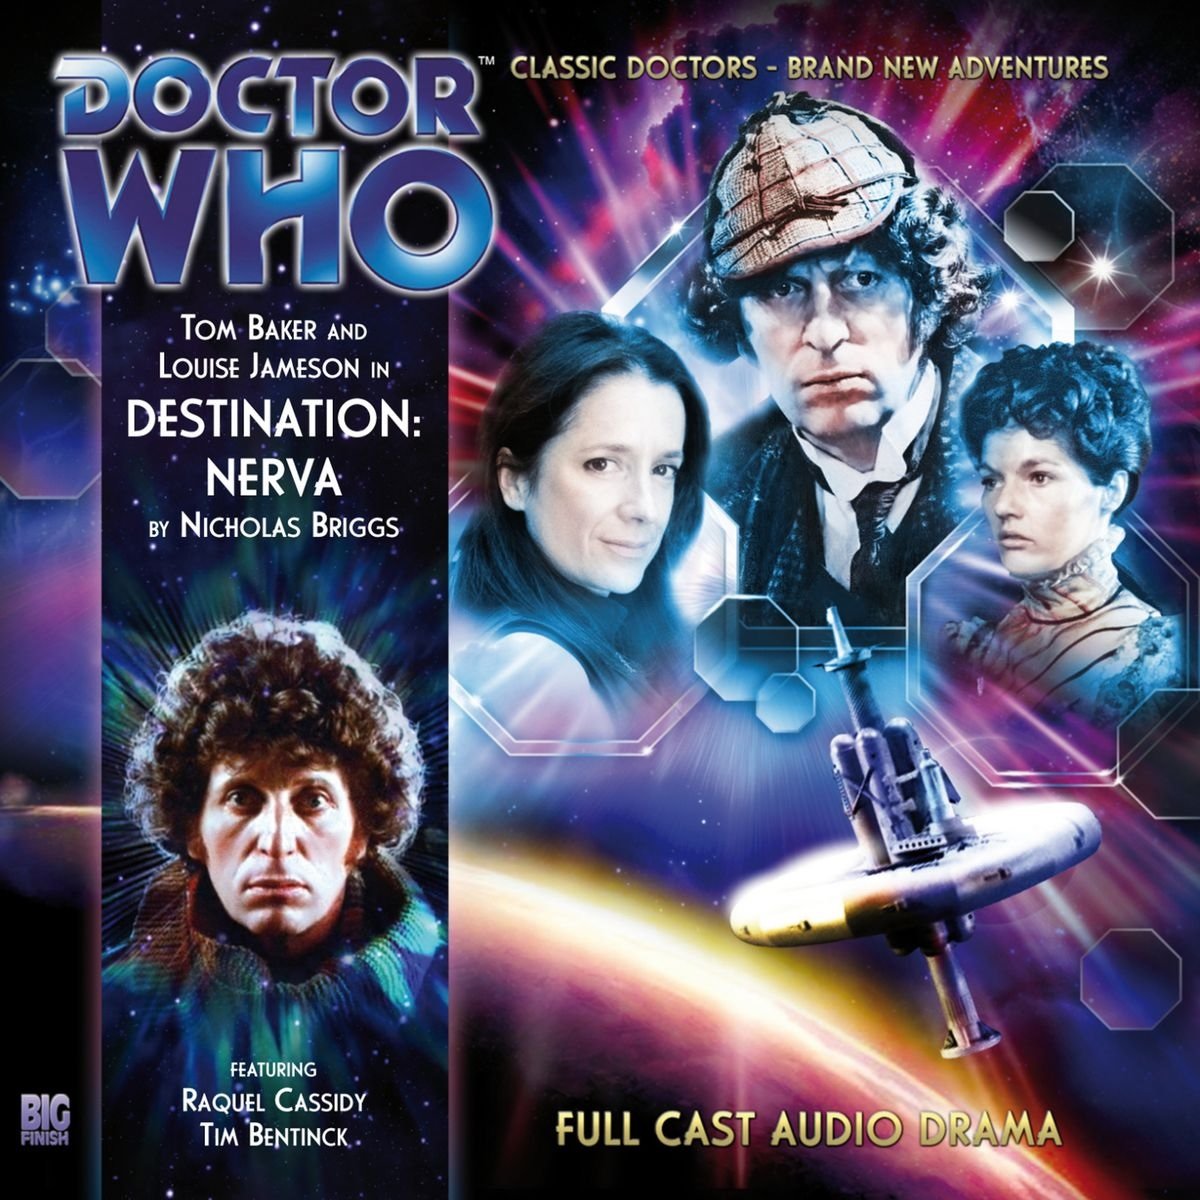 Free to Download Now: Big Finish’s Destination Nerva With Tom Baker’s Fourth Doctor